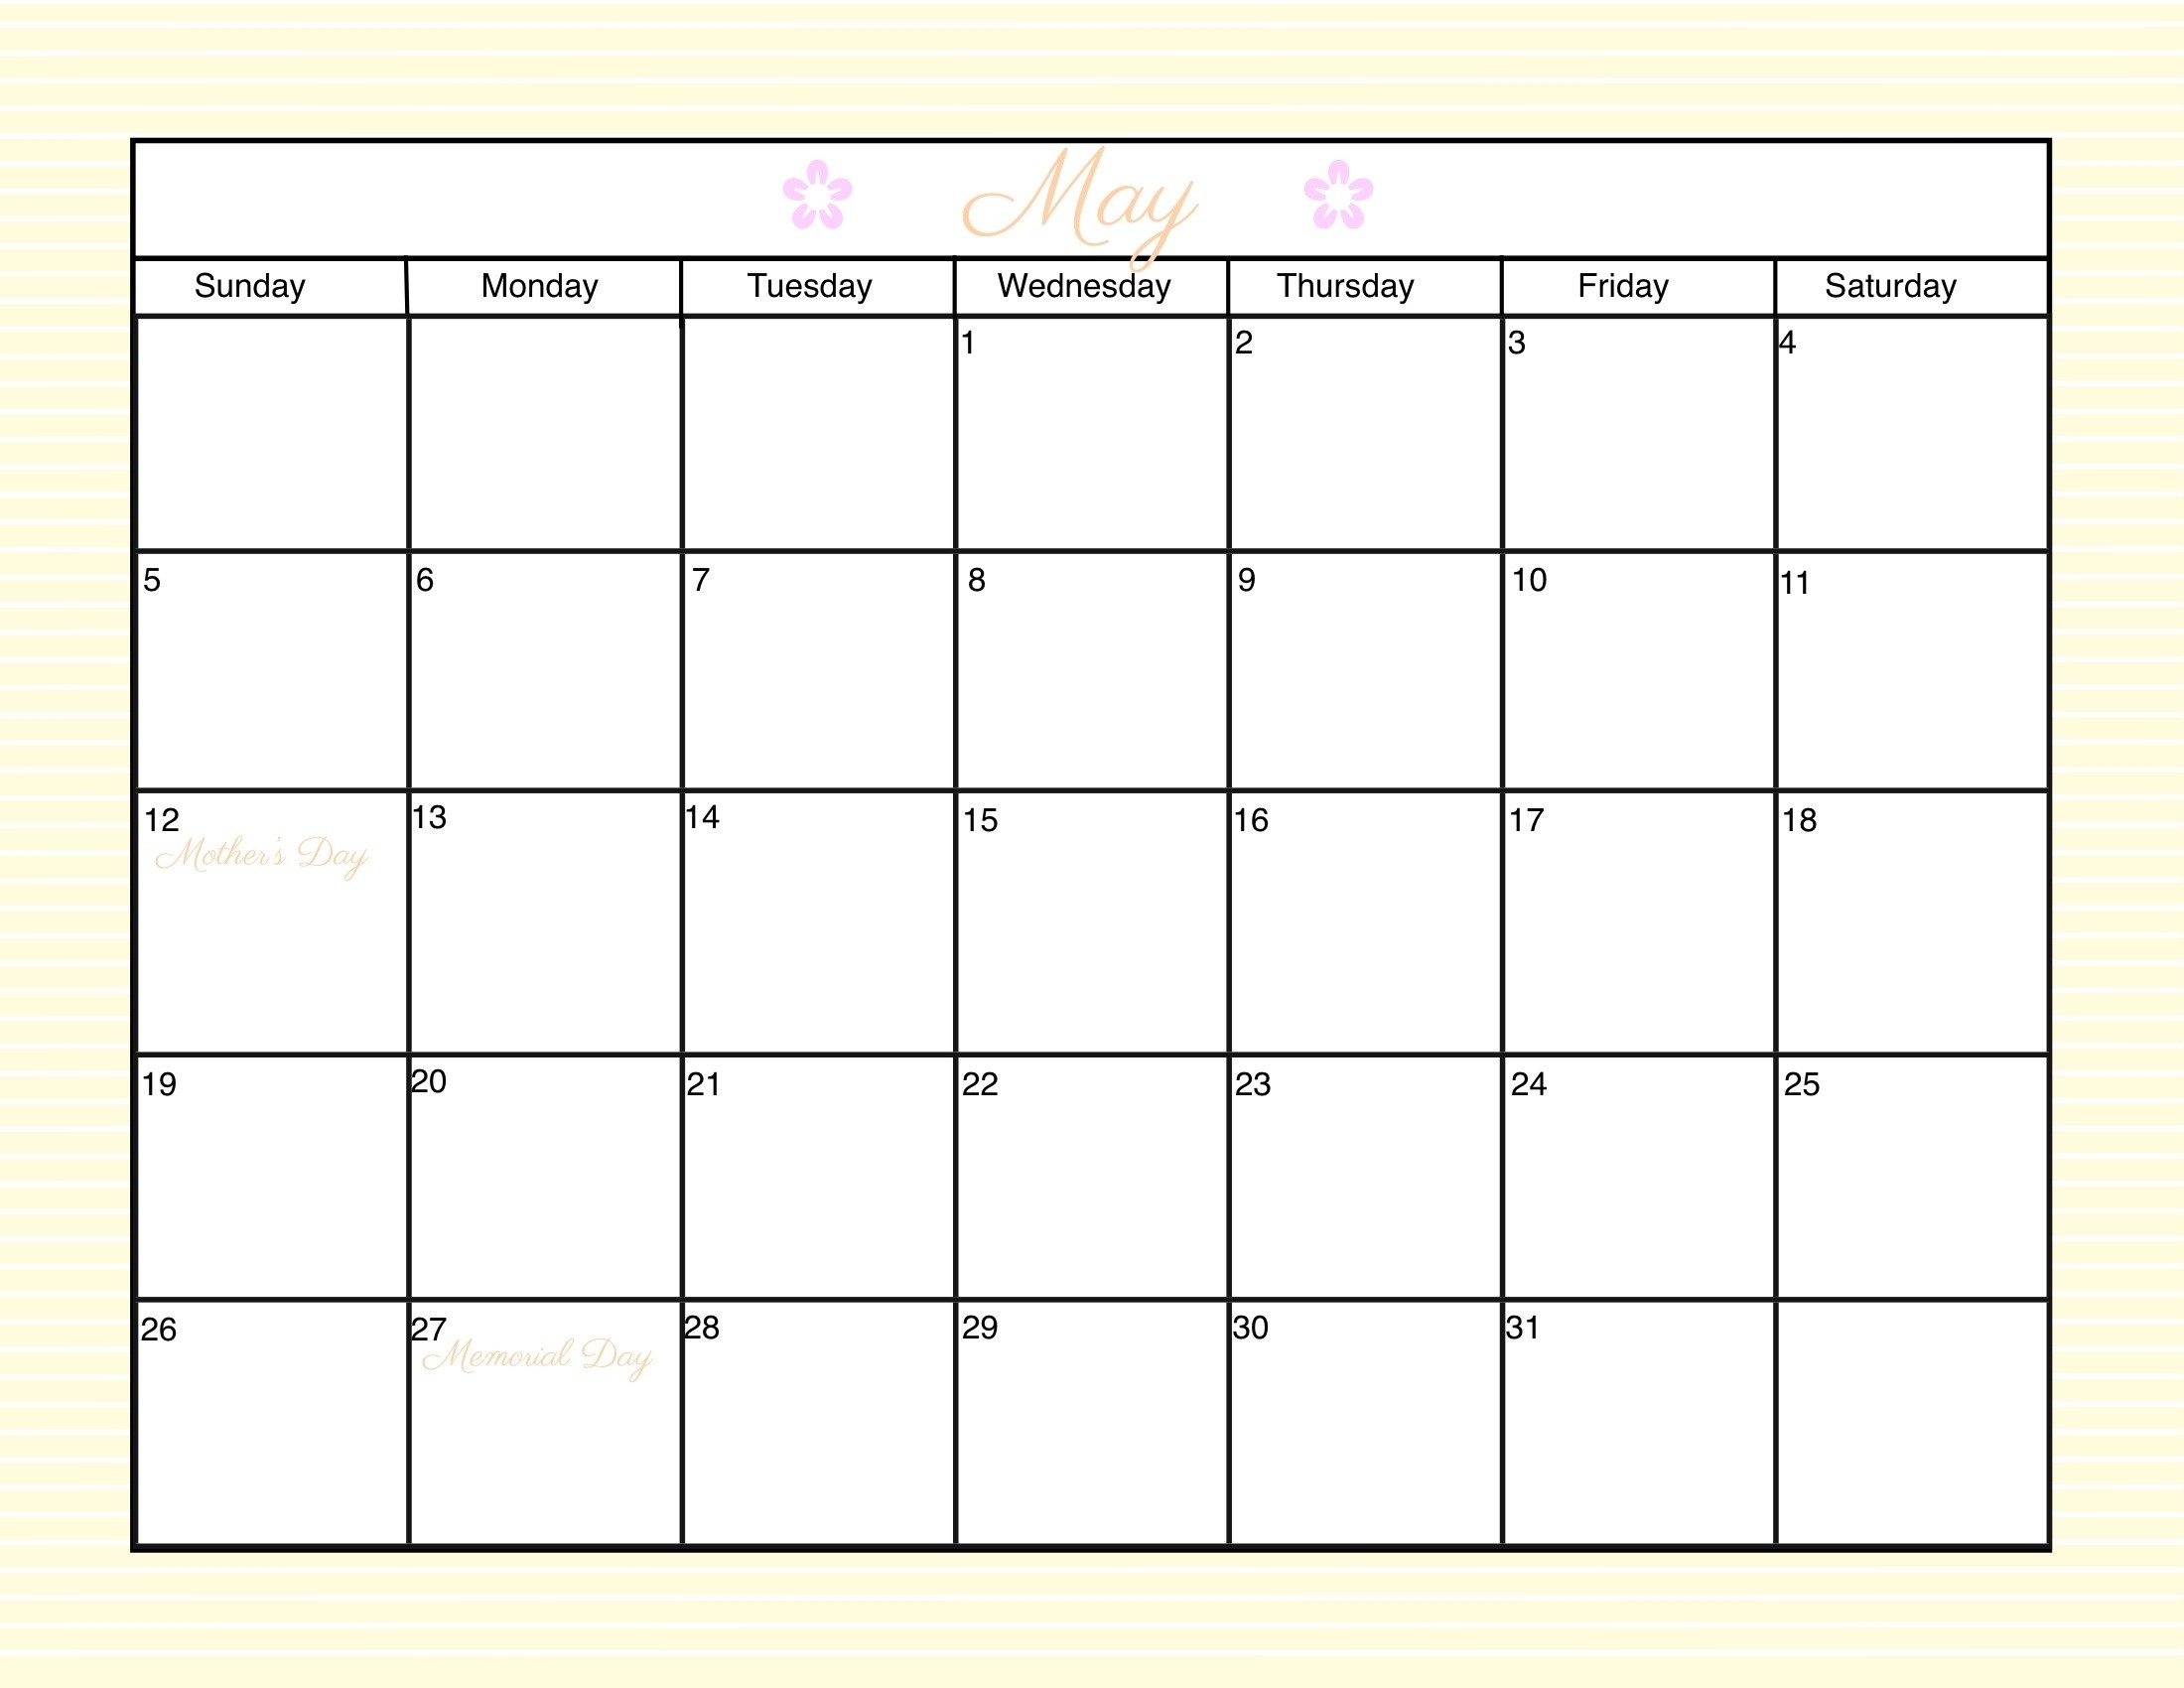 Awesome Printable Calendars Com | Free Printable Calendar Monthly With Blank Calender Template